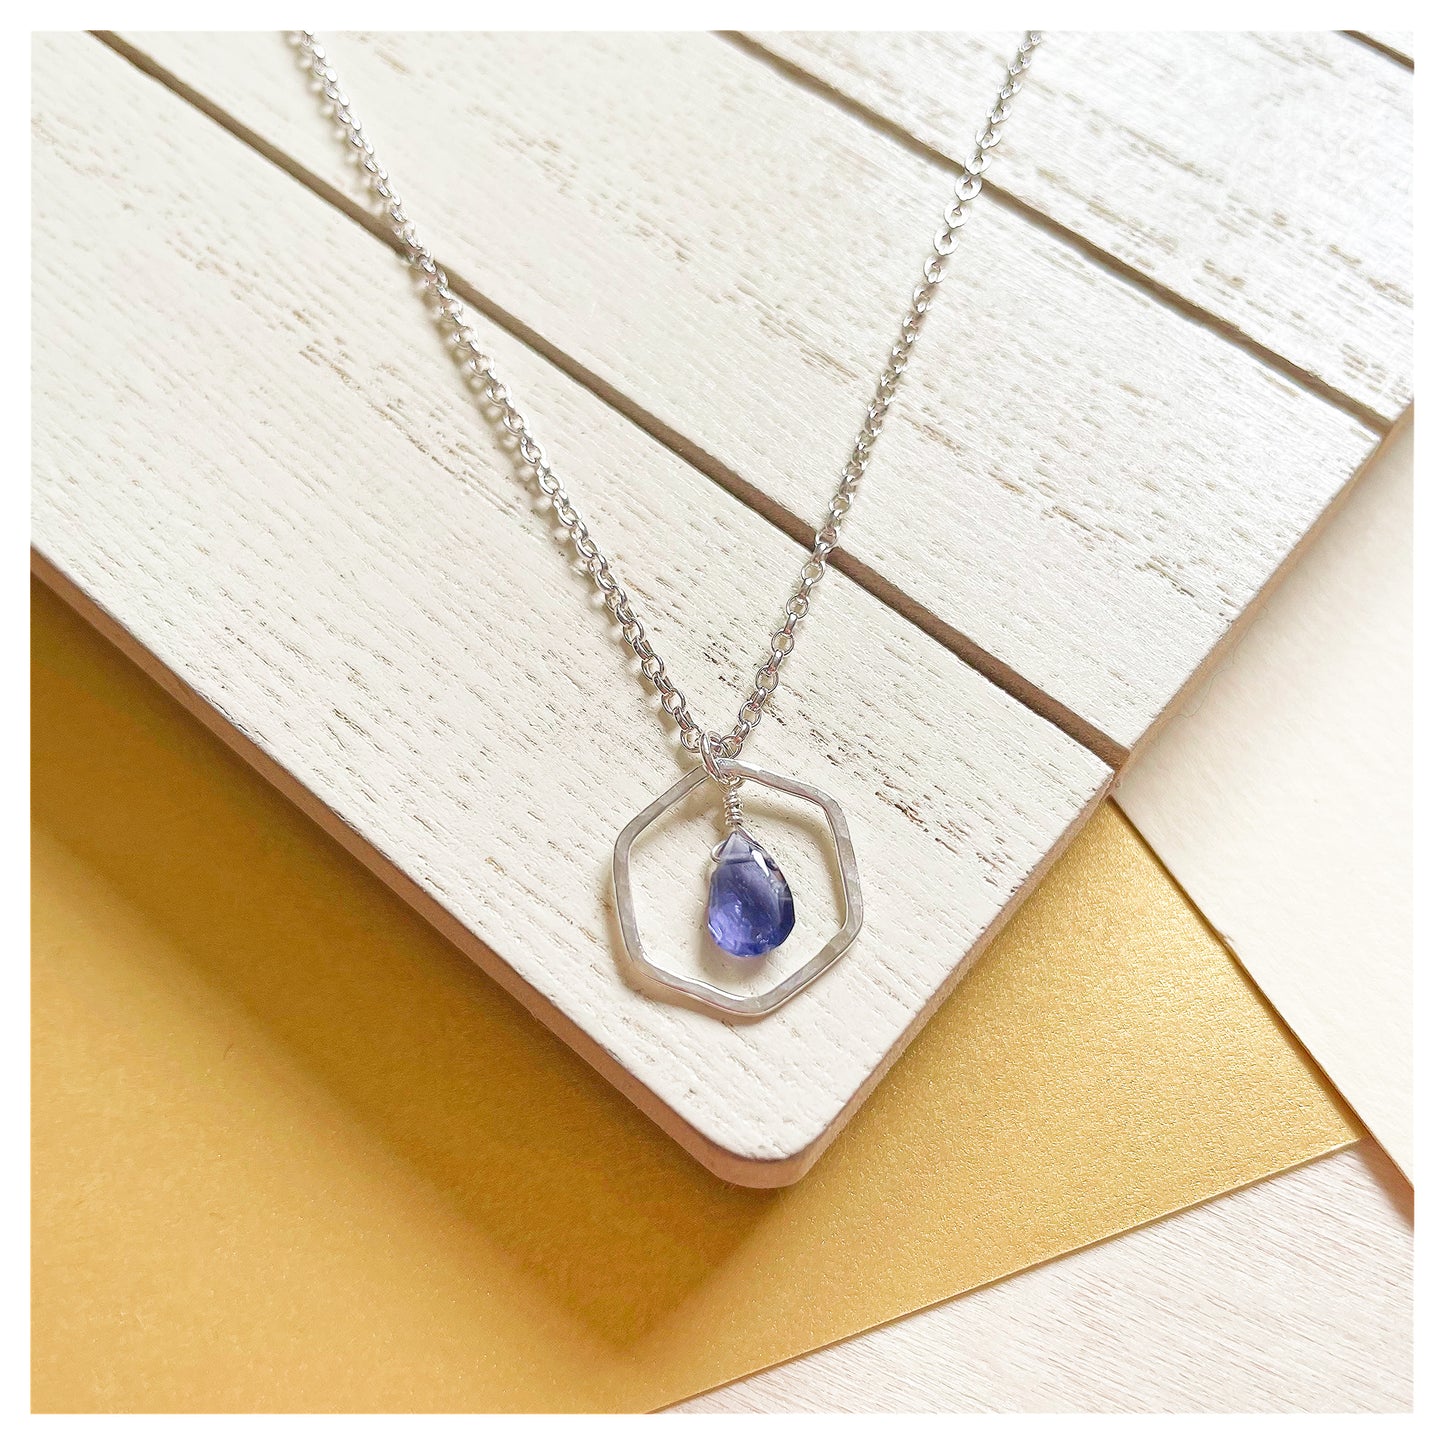 Mini Sterling Silver Hammered Hexagon and Iolite Briolette Necklace.